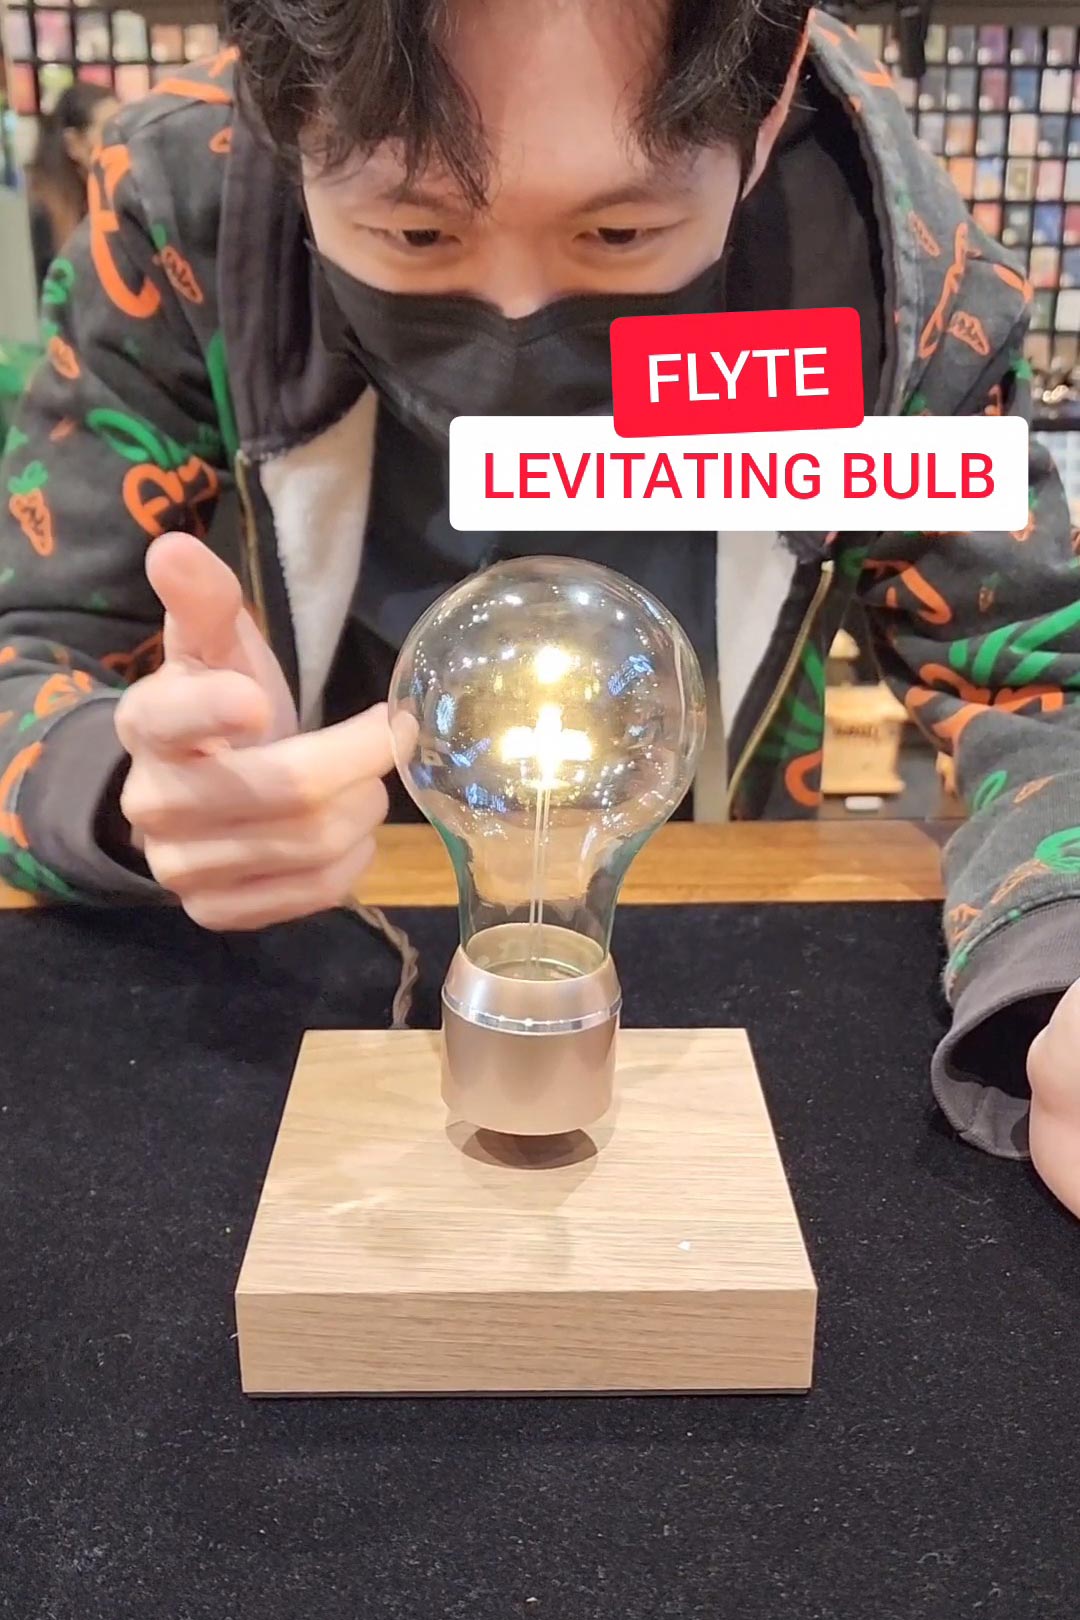 This is Flyte, a levitating light bulb!